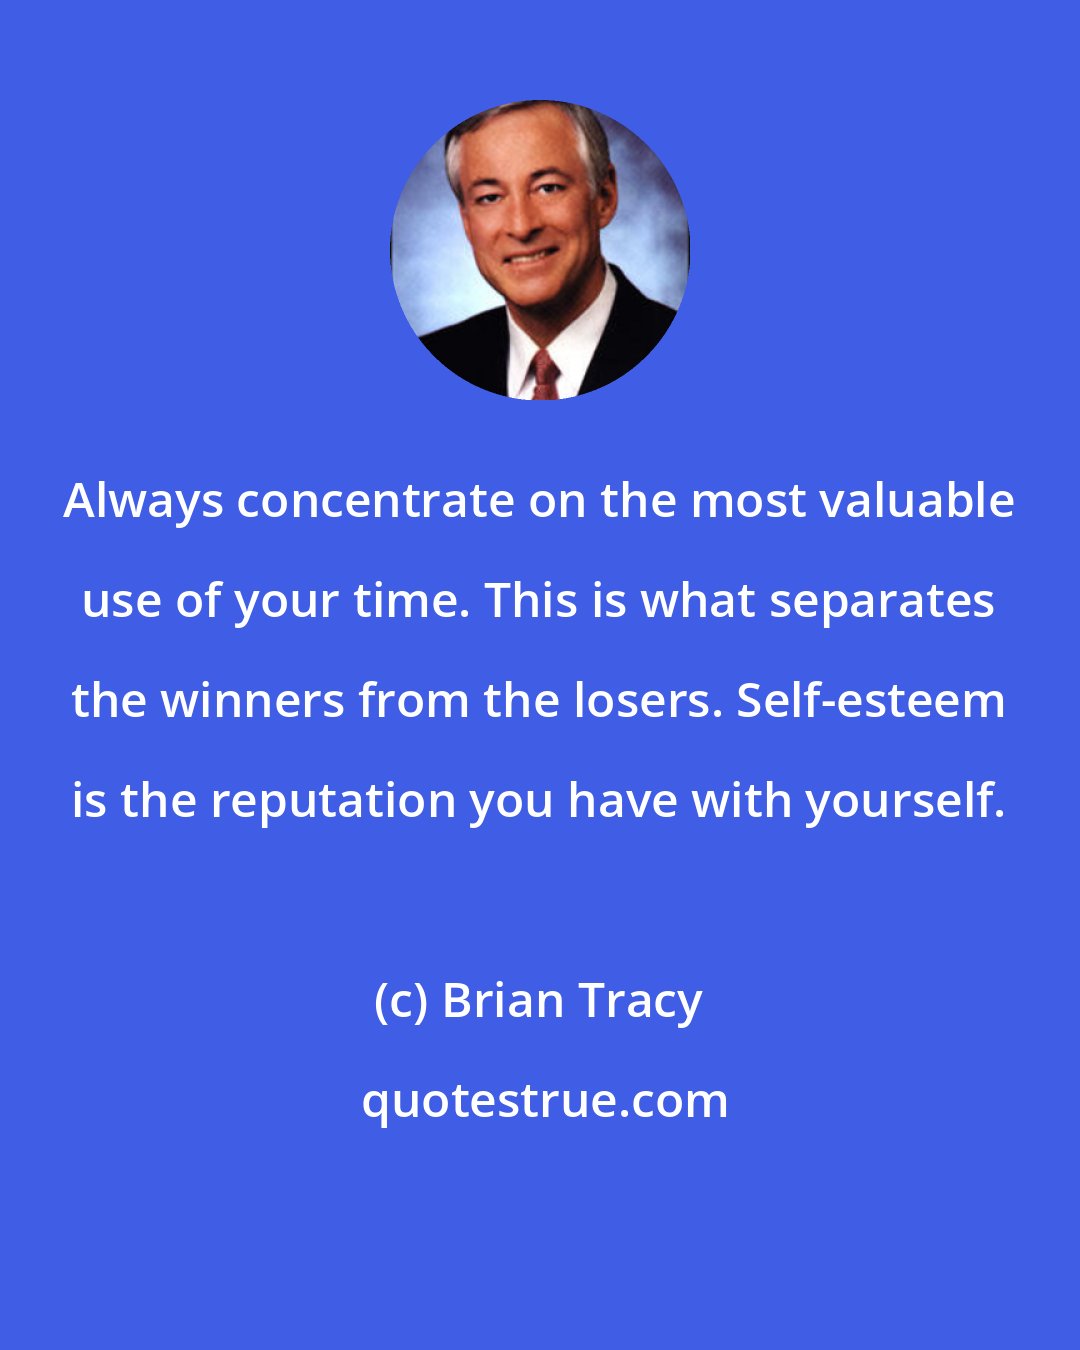 Brian Tracy: Always concentrate on the most valuable use of your time. This is what separates the winners from the losers. Self-esteem is the reputation you have with yourself.